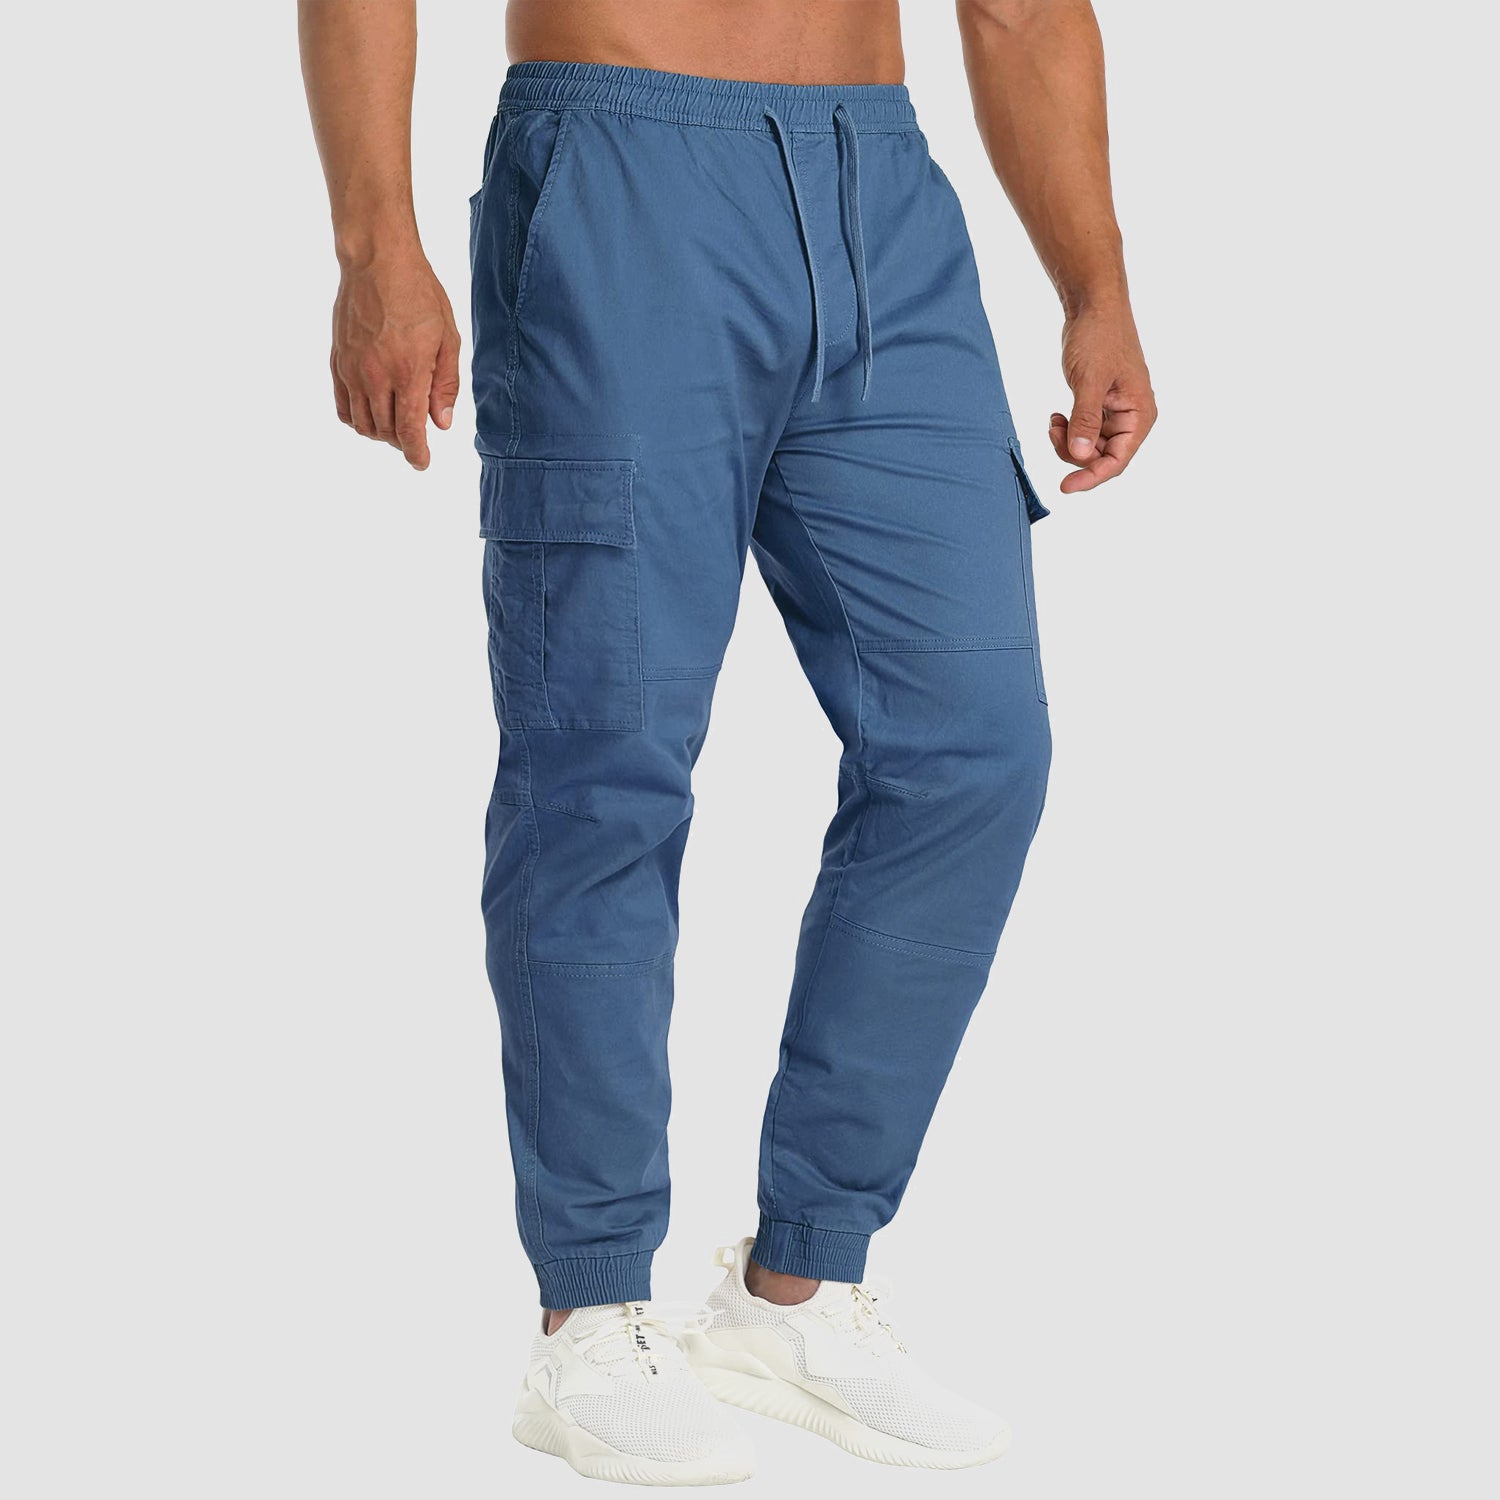 https://magcomsen.com/cdn/shop/products/Men_s-Cargo-Pants-Elastic-Waist-Hiking-Ripstop-Outdoor-Casual-Fishing-Pant-with-5-Pockets_13.jpg?v=1662435988&width=1500